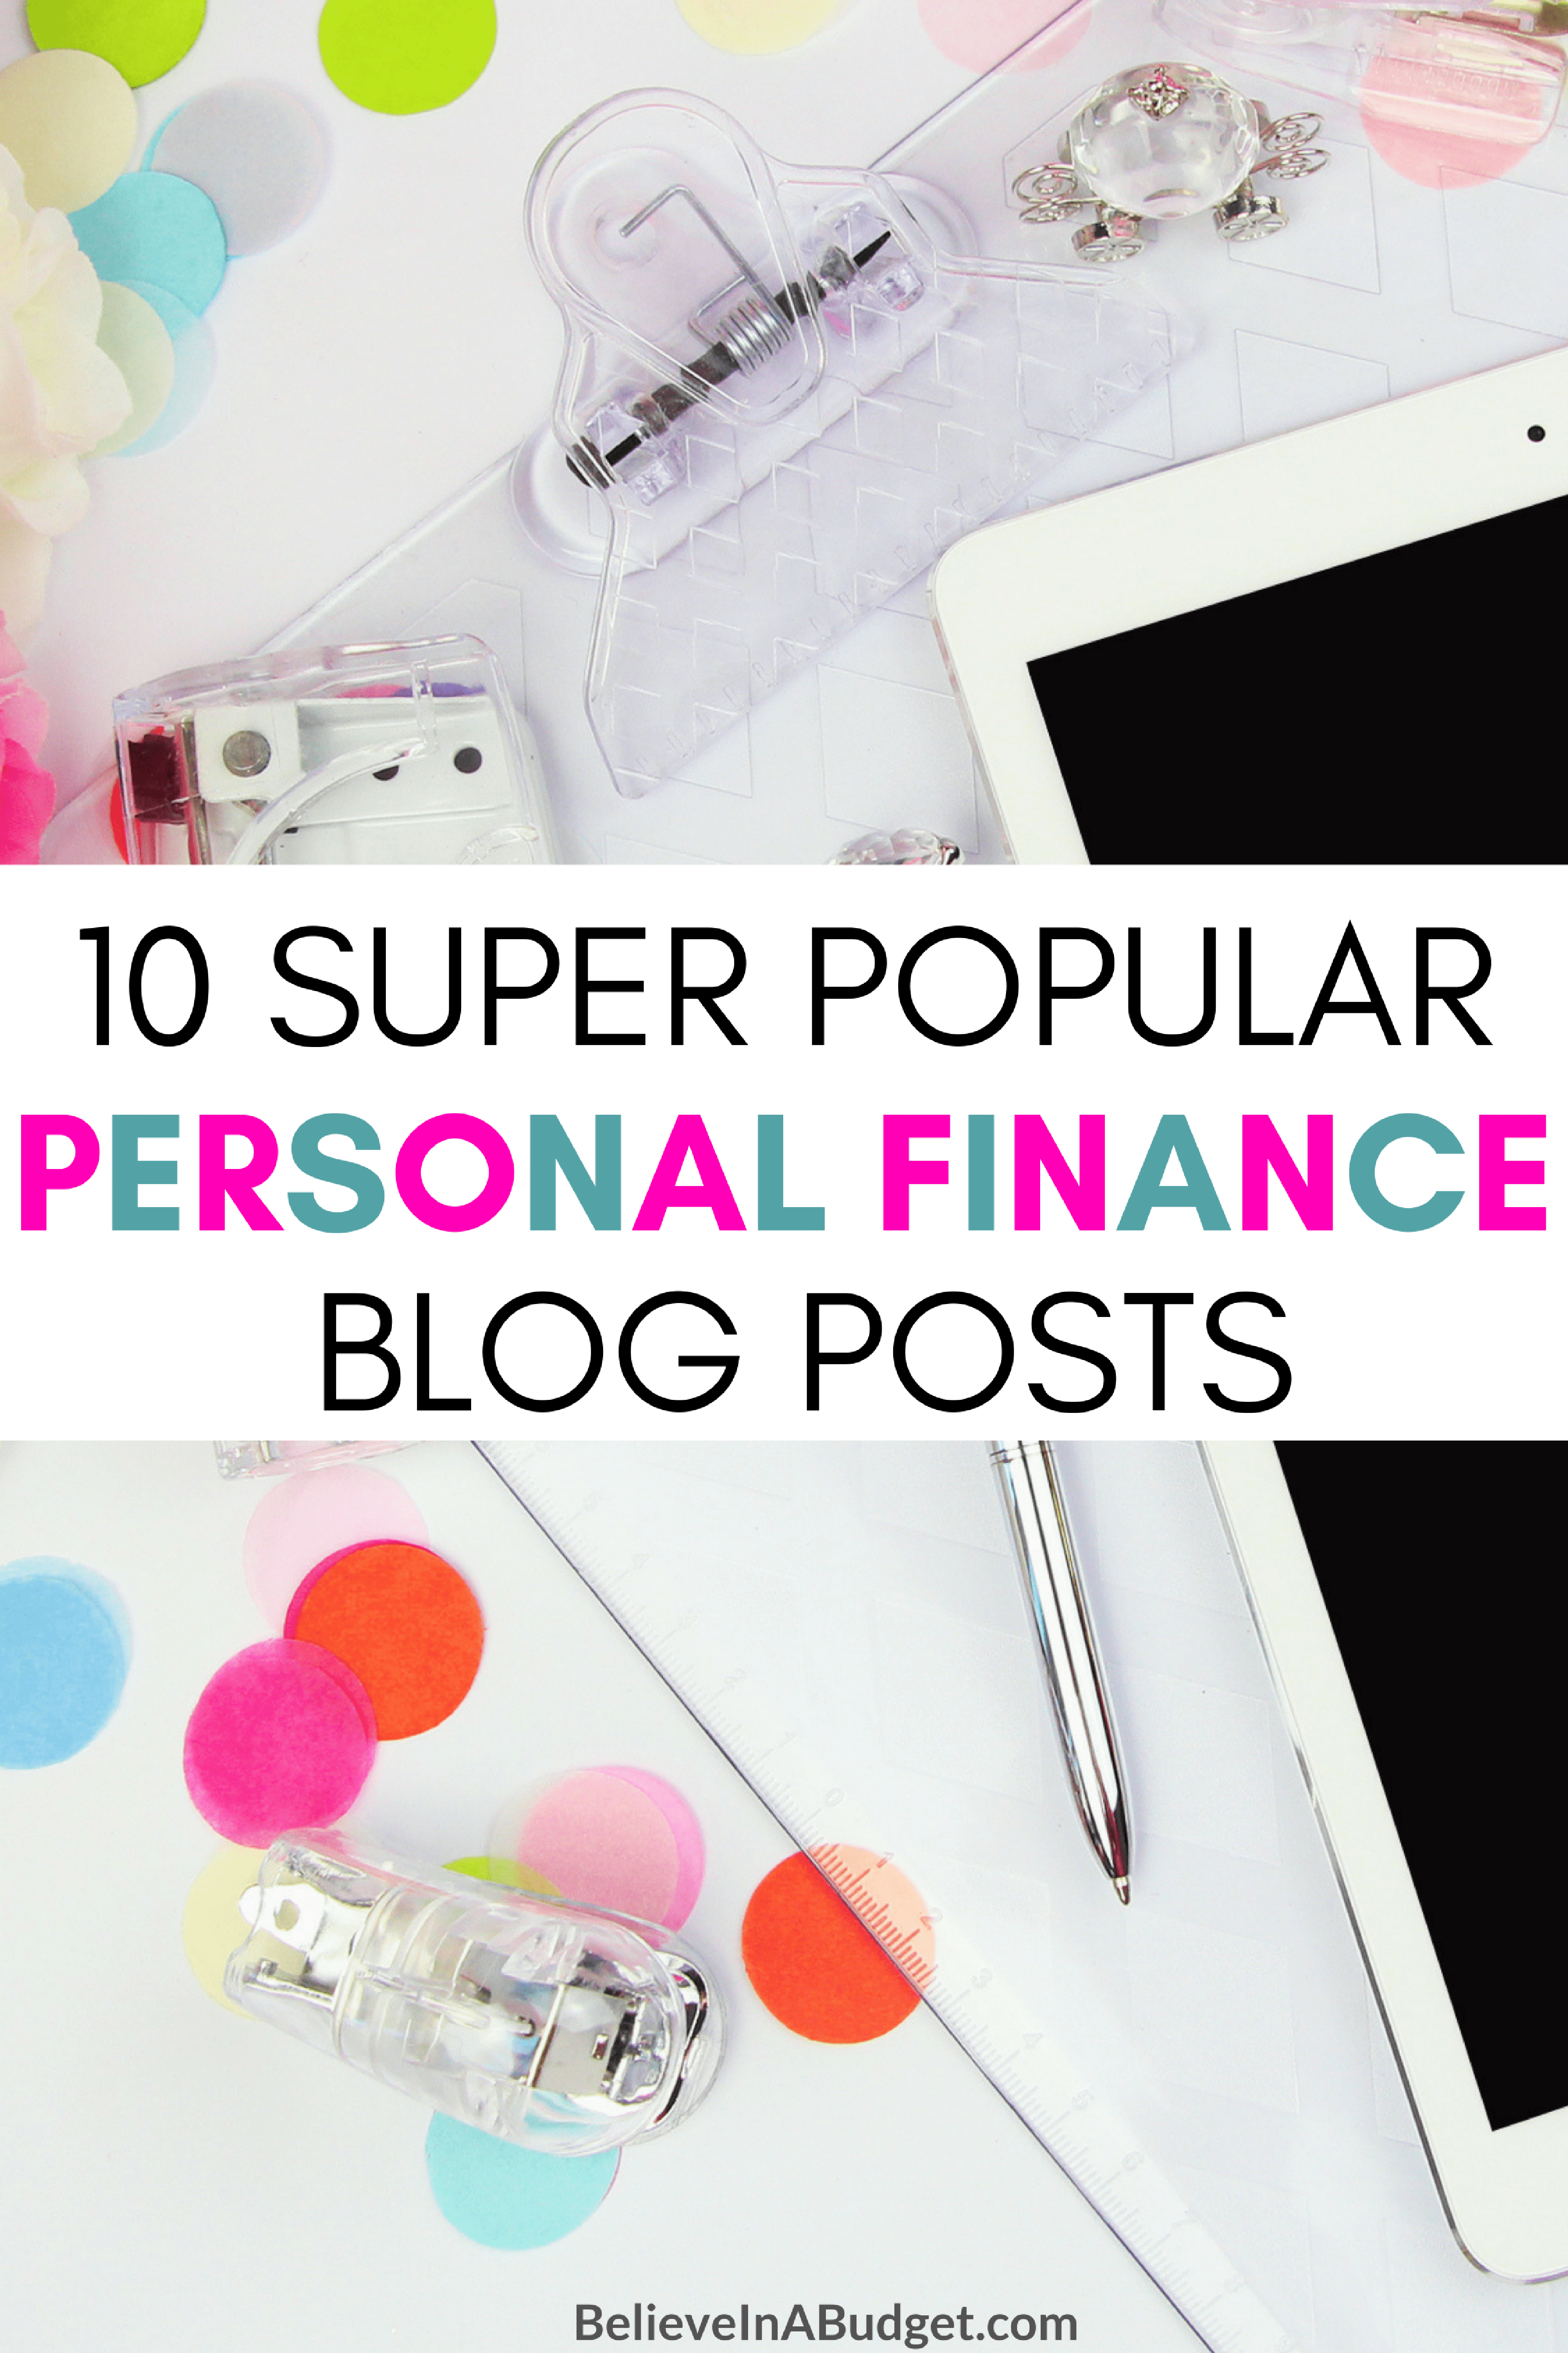 These are ten really popular personal finance blog posts that help with saving money, making extra money, side hustles and getting out of debt.